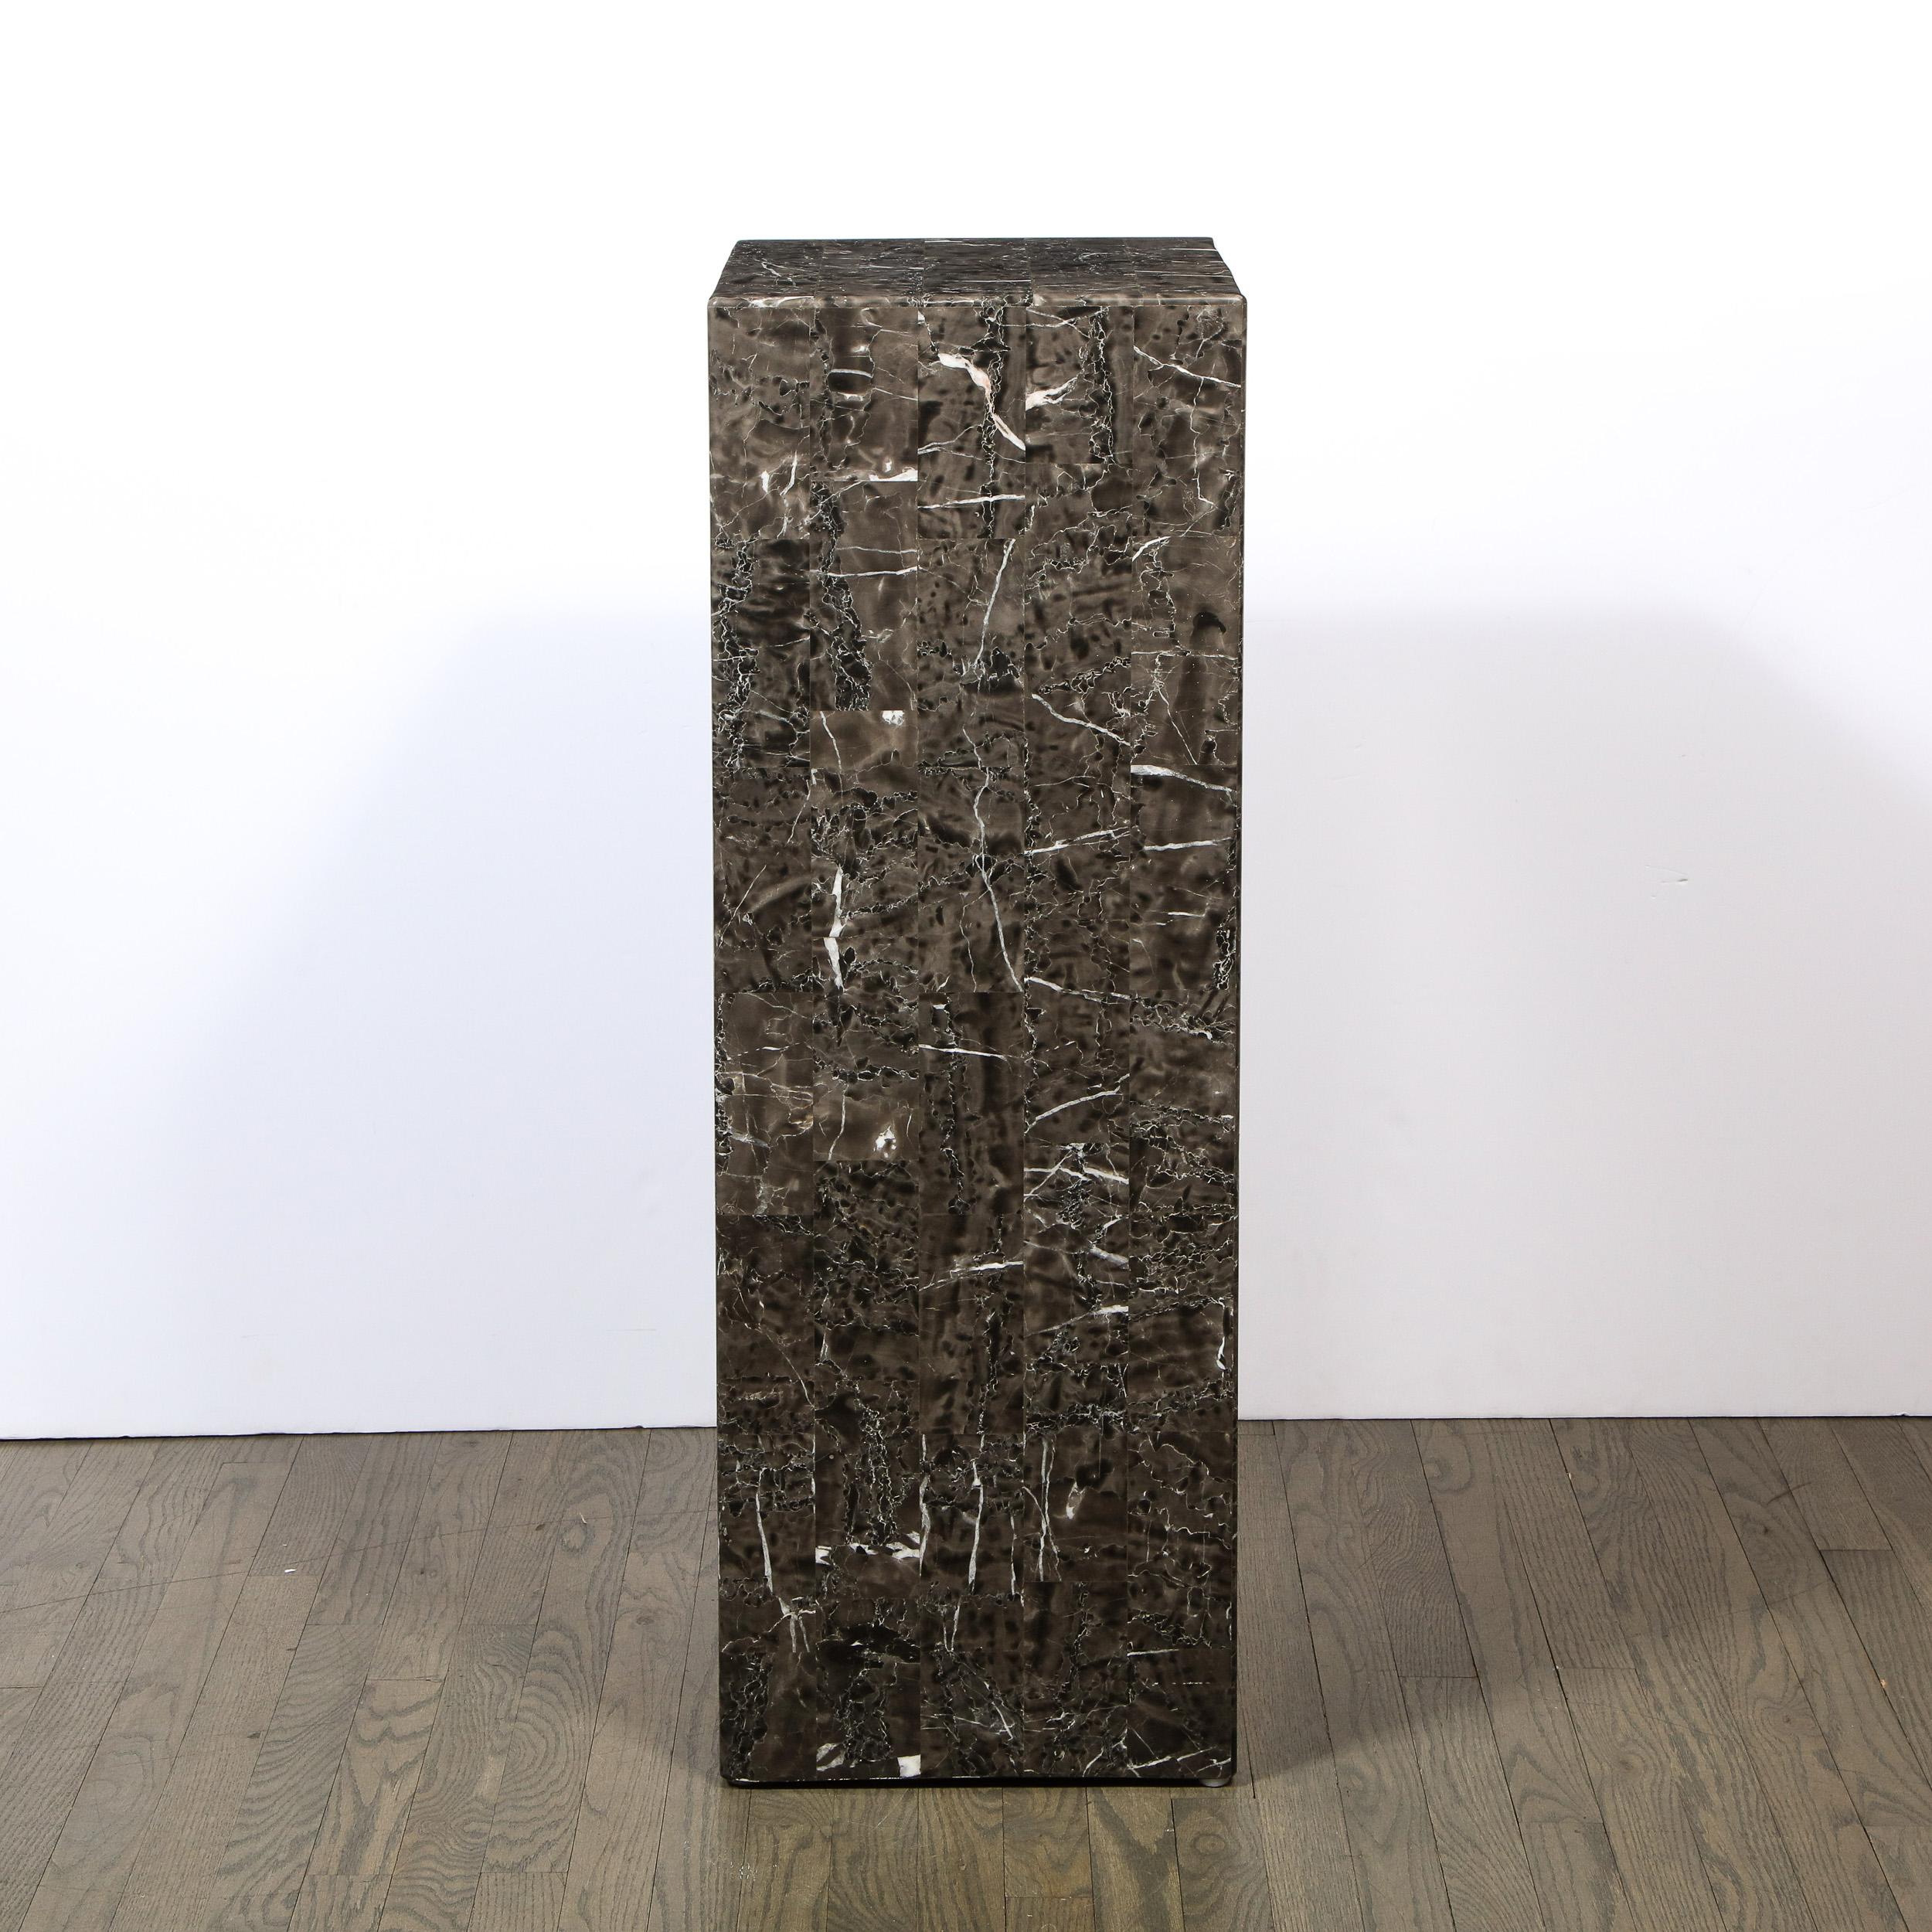 This refined modernist pedestal was realized in the United States during the latter half of the 20th century. It features a volumetric rectangular body with a tessellated marble exterior, showcasing the dynamic and stunning inherent stone grain.